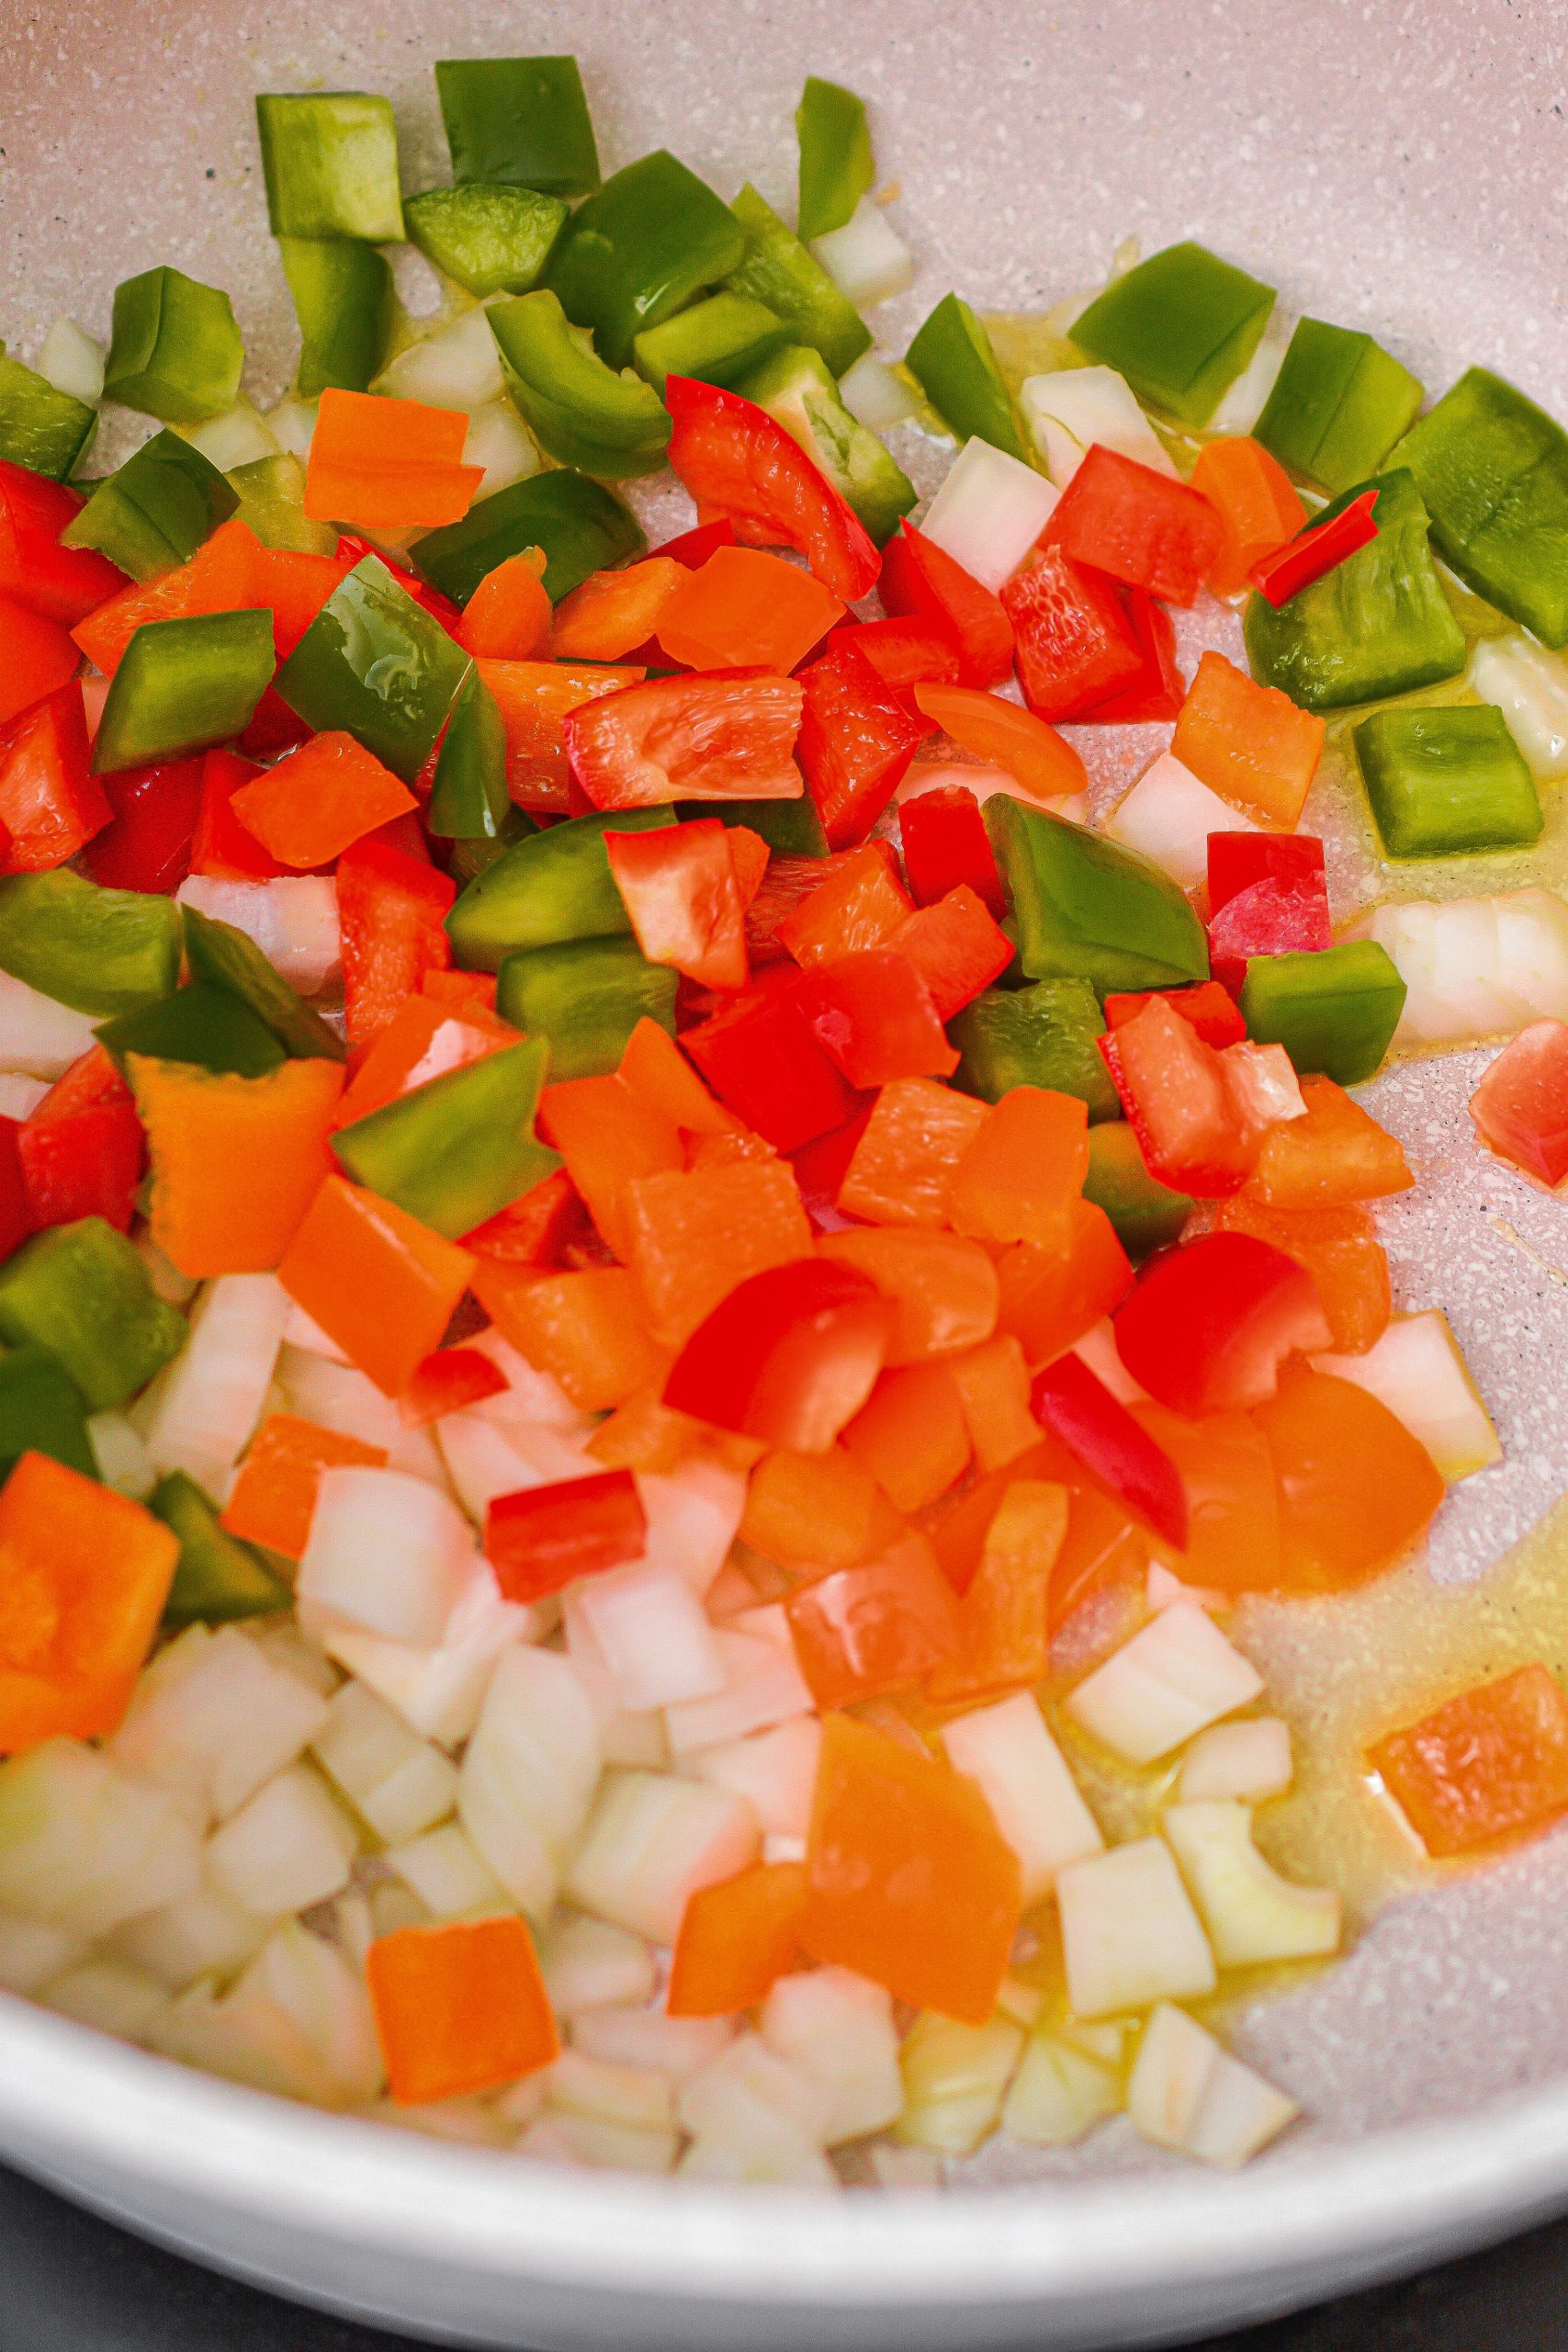 Add bell peppers to a skillet over medium-high heat on the stove.